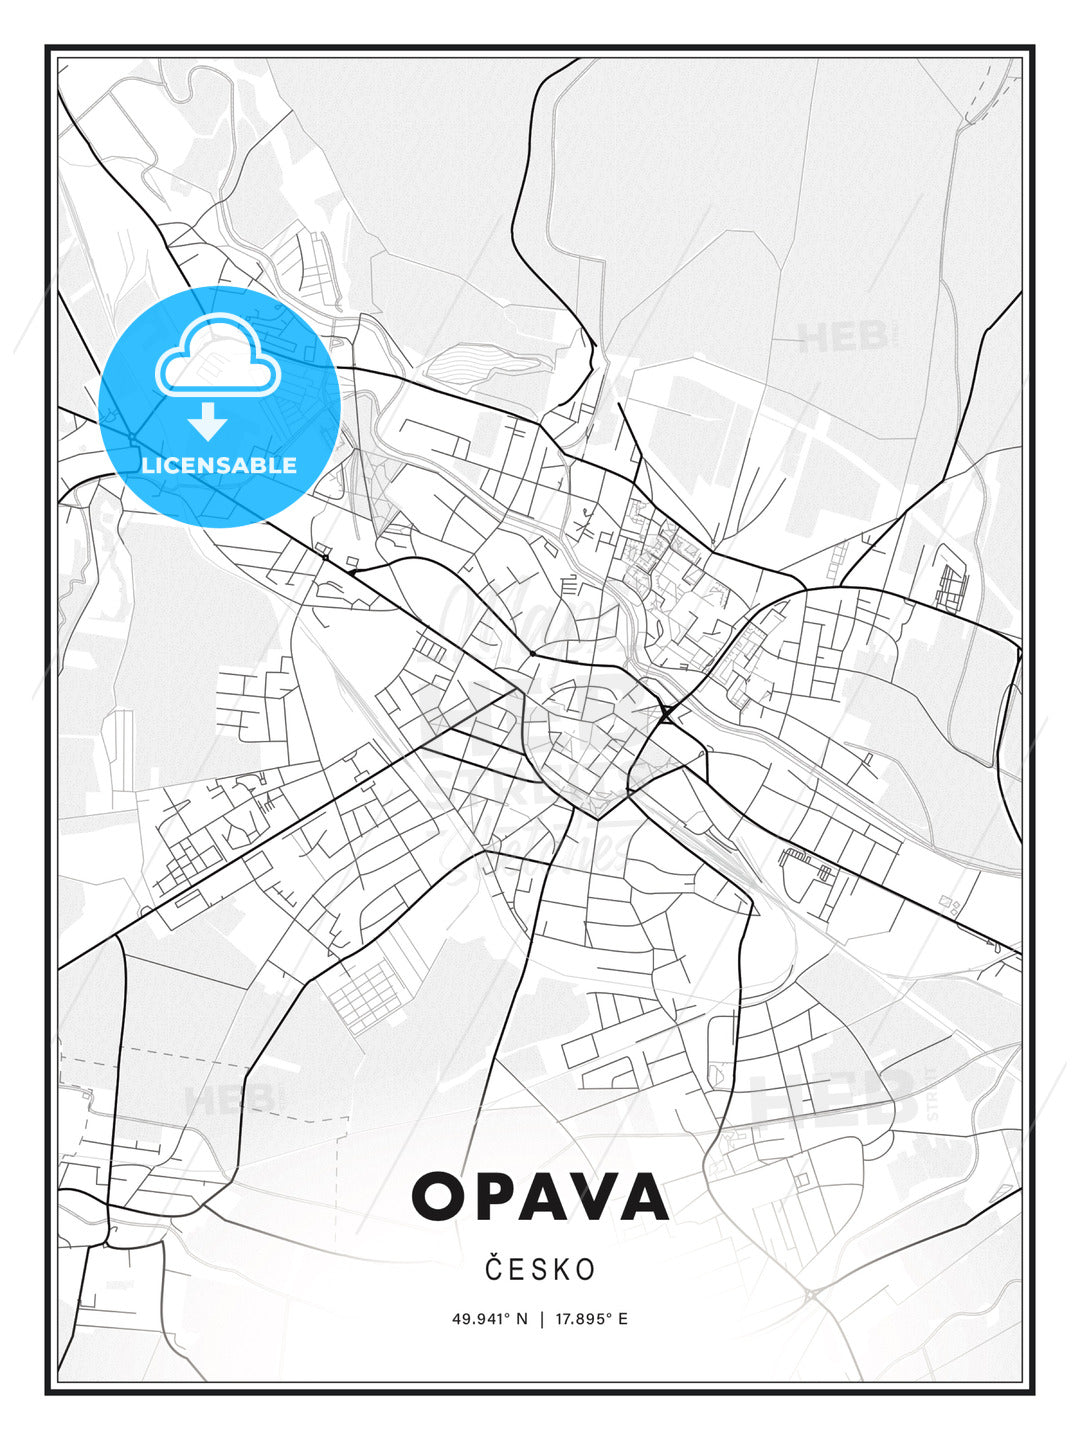 Opava, Czechia, Modern Print Template in Various Formats - HEBSTREITS Sketches